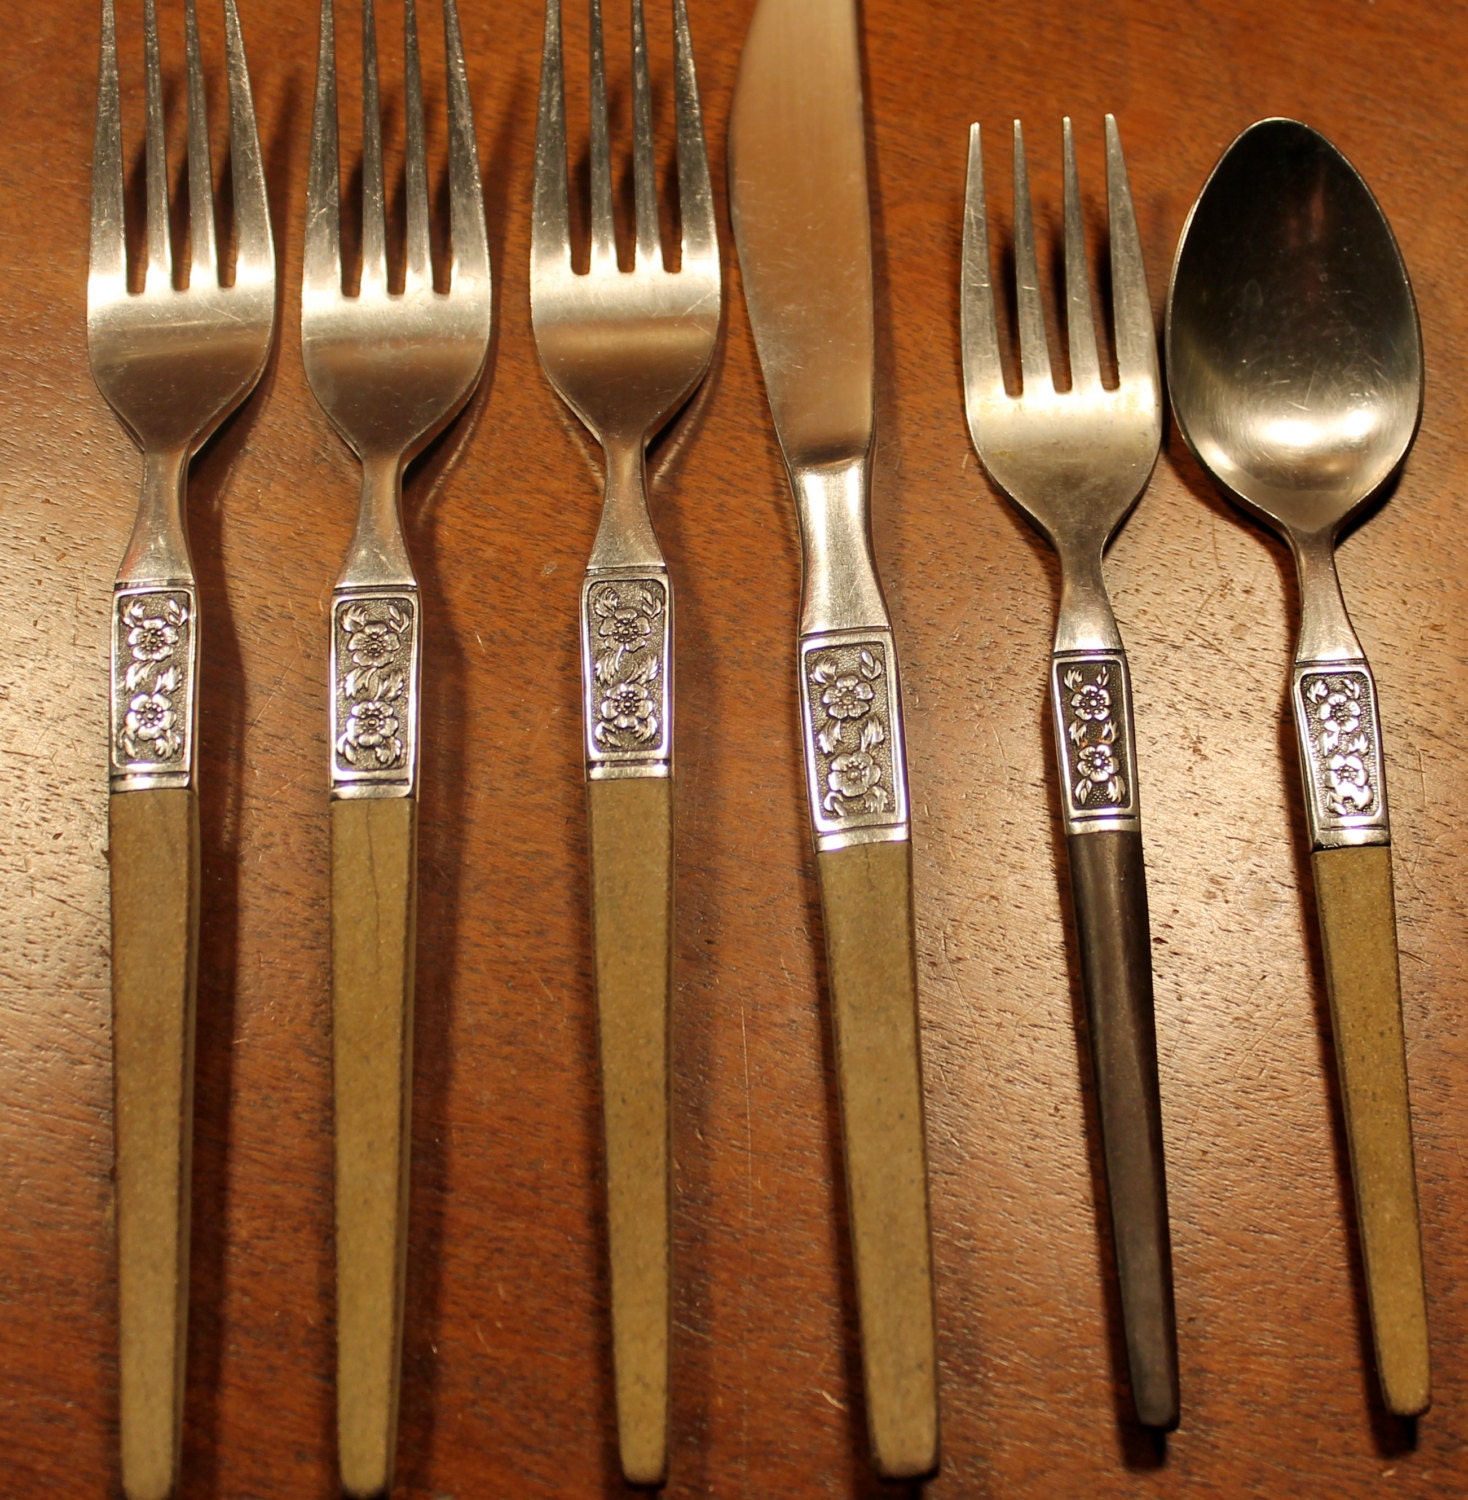 IMPERIAL Stainless Flatware IMI41 starburst Star by AtomicHoliday